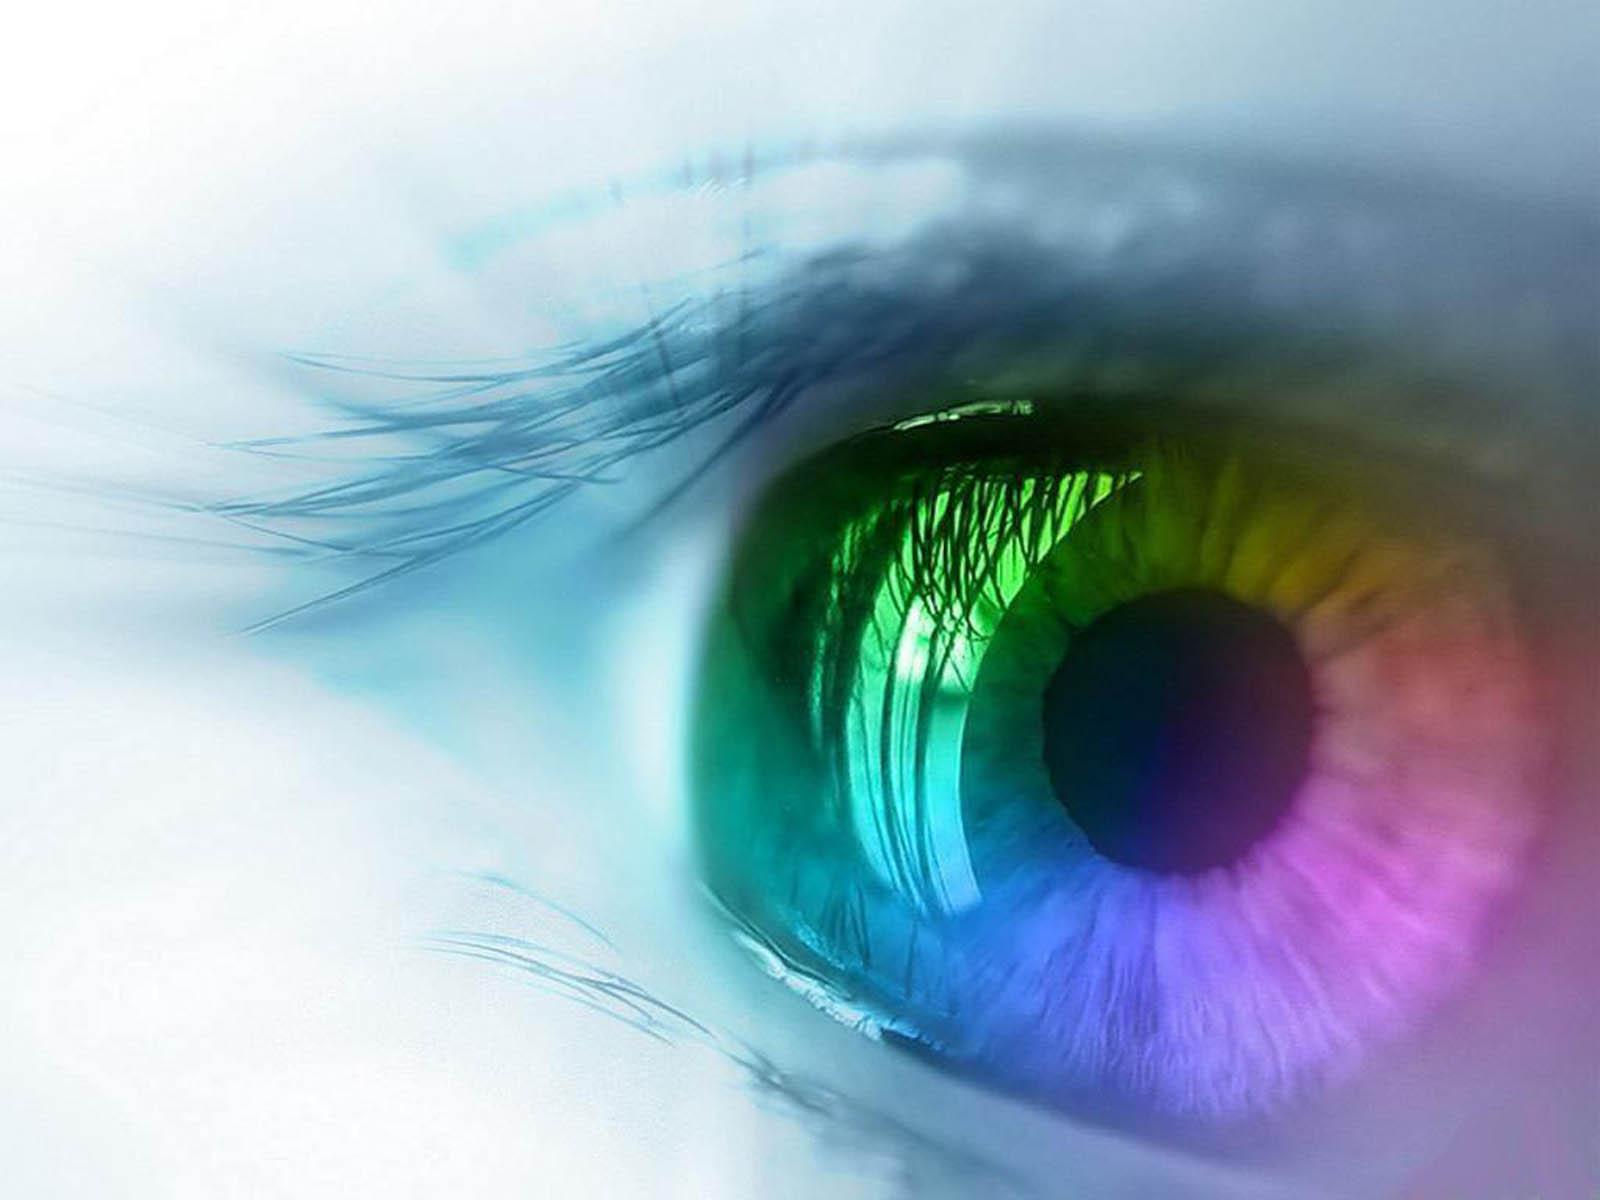 Eye Wallpaper. Free Background Download For Android, Desktop. HD